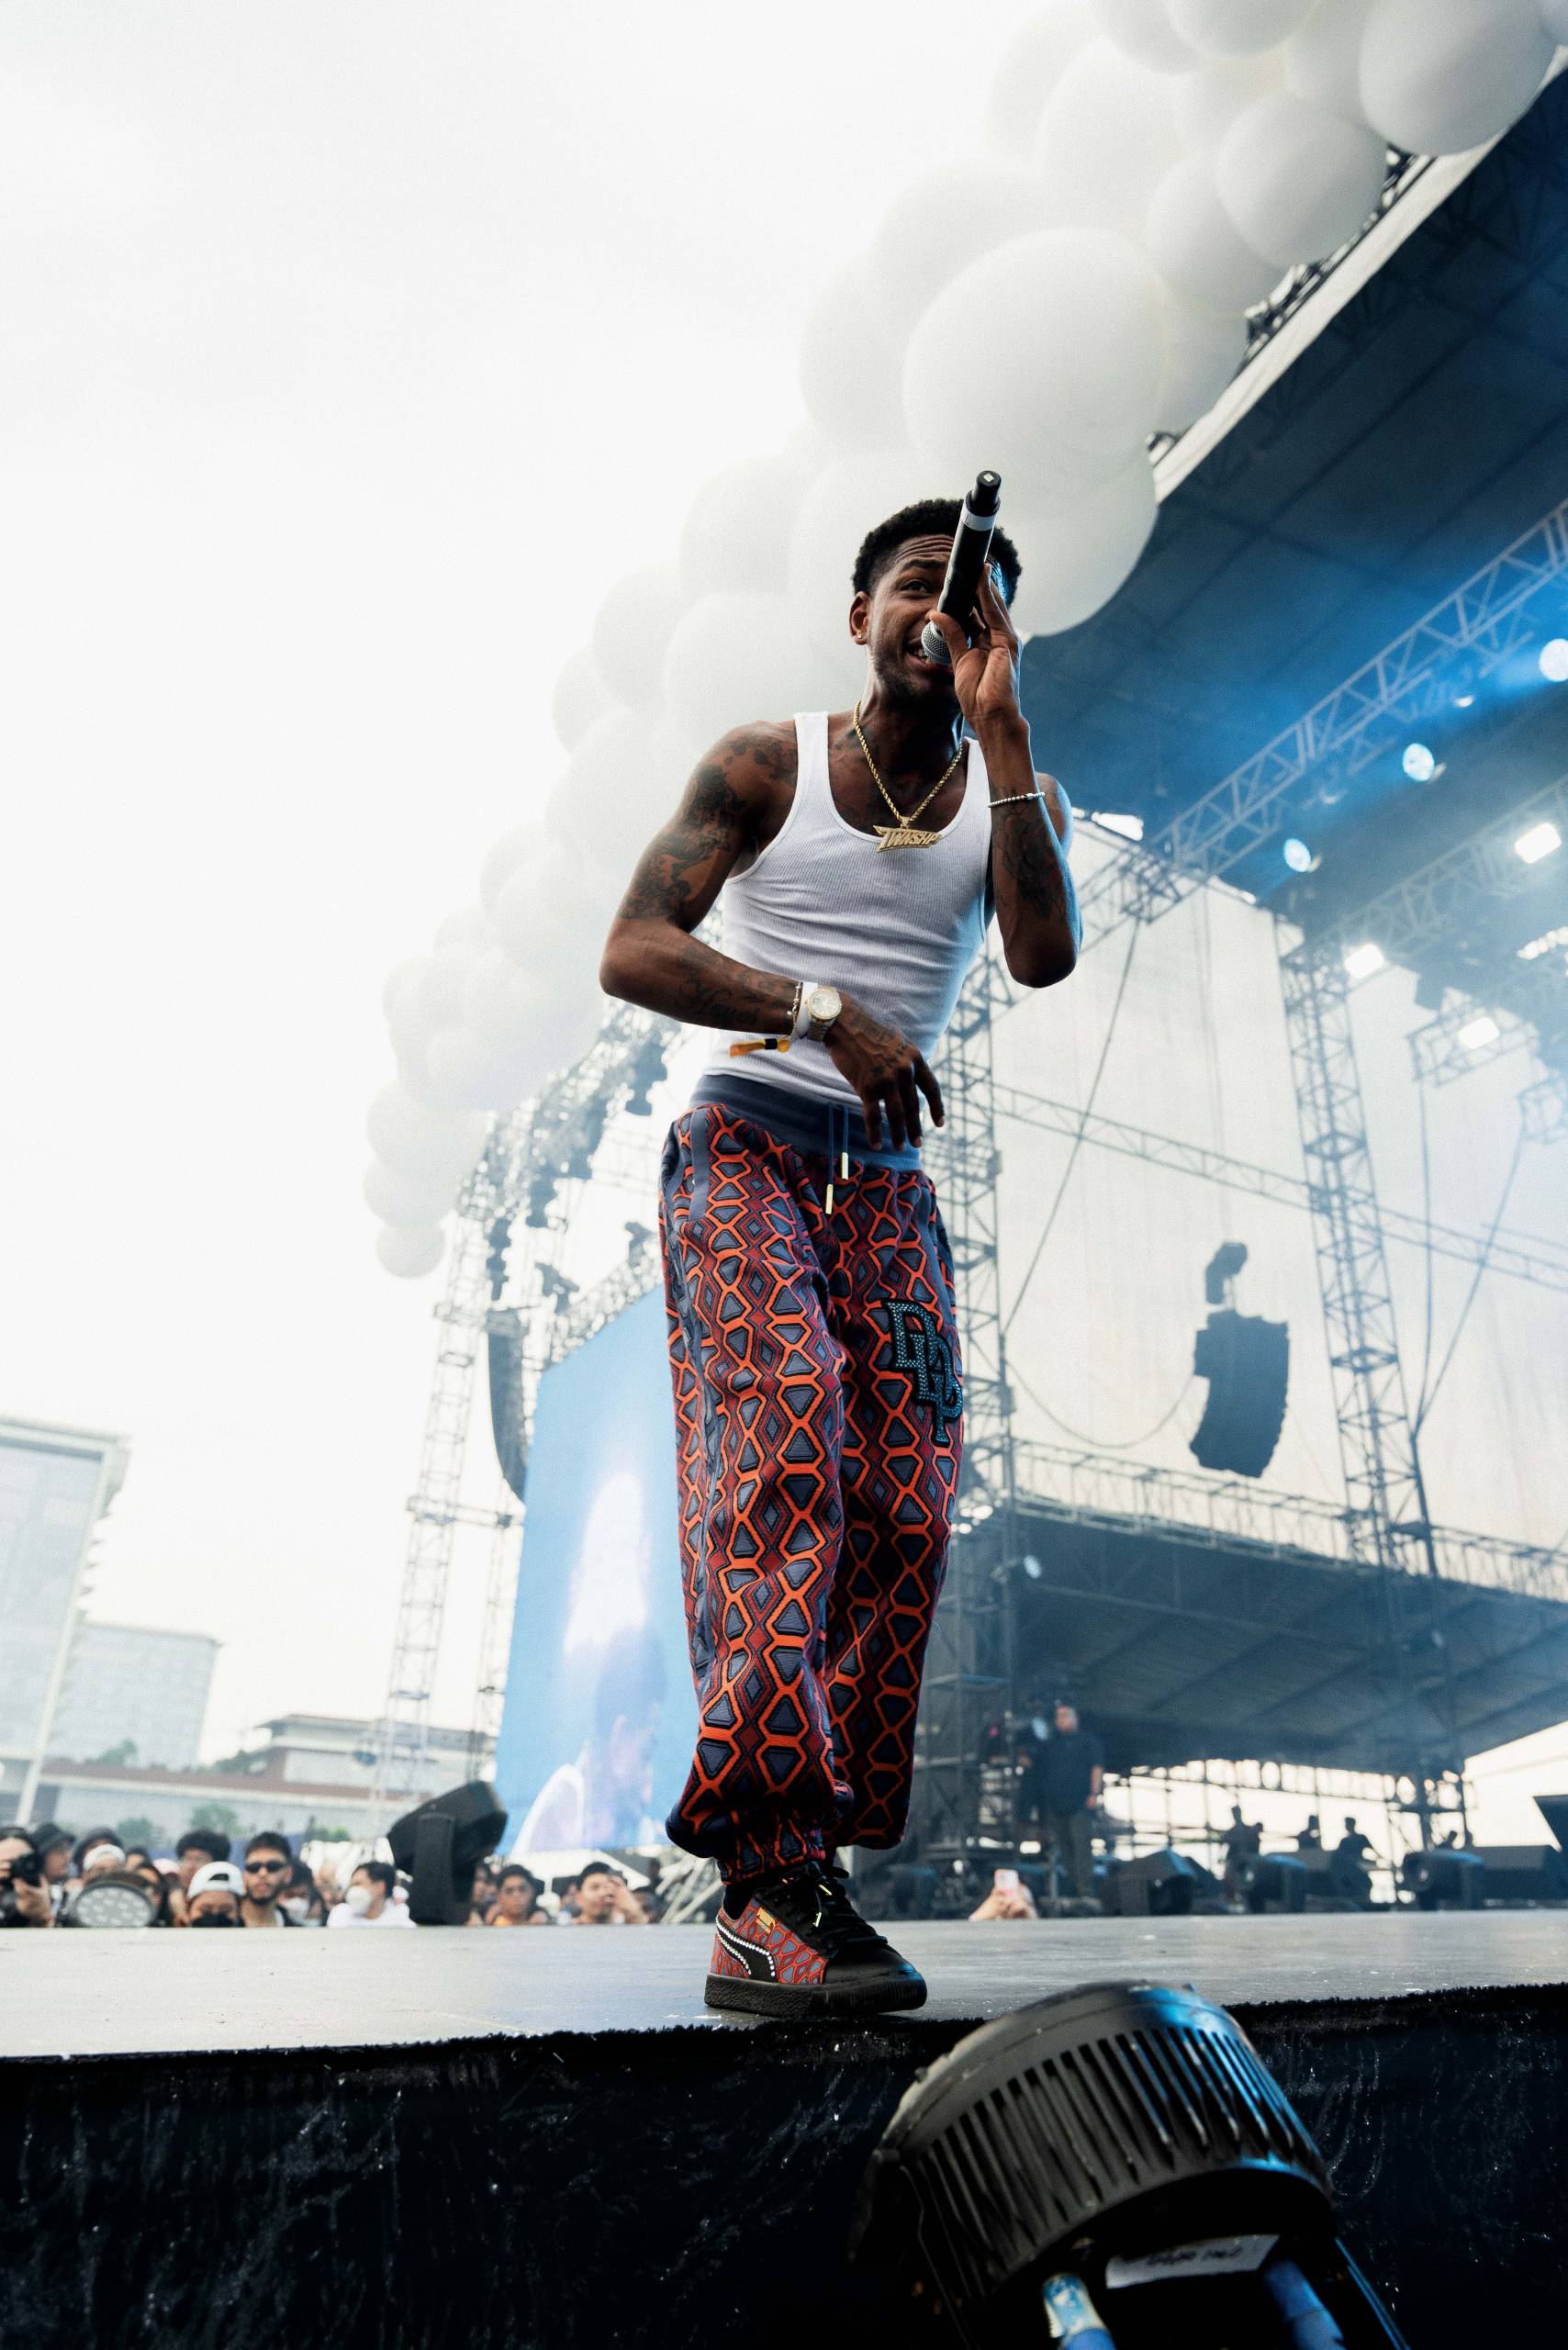 Rapper, musician Guap performs live on stage at a concert. He holds a mic in his hand as he wears a white tank top and red and orange-patterned pants.